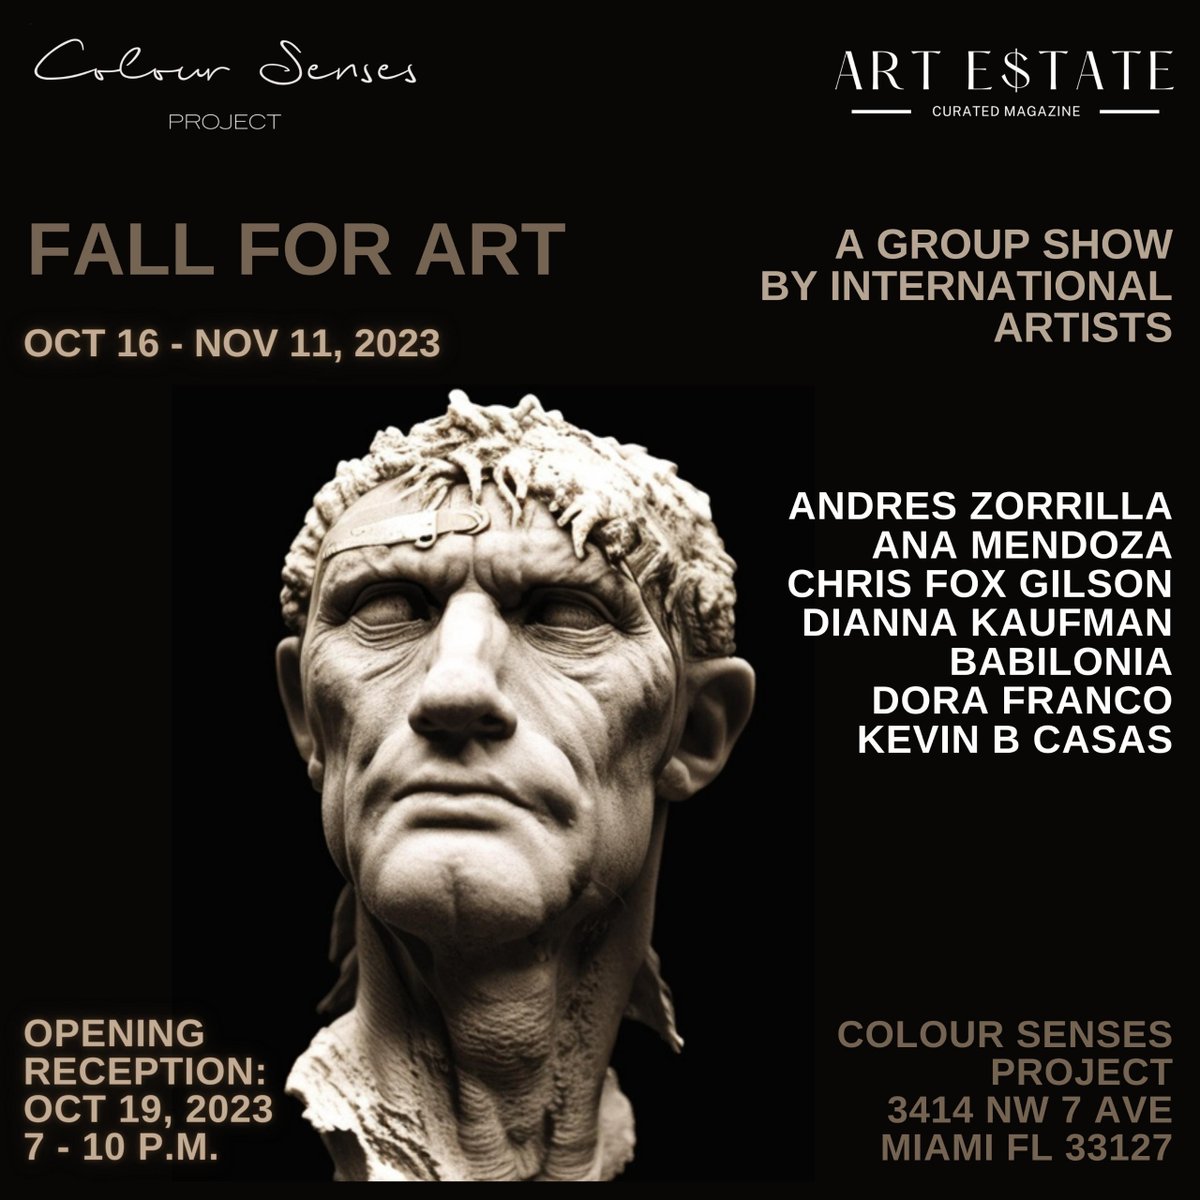 Please join us for the next exhibition.
Fall for Art
October 16th-November 11th, 2023
A group show by international artists.
Opening reception
Thursday, October 19th
7-10 pm
#artinpublicplaces #artexhibition #artistsoninstagram #art #miamiartcollectors